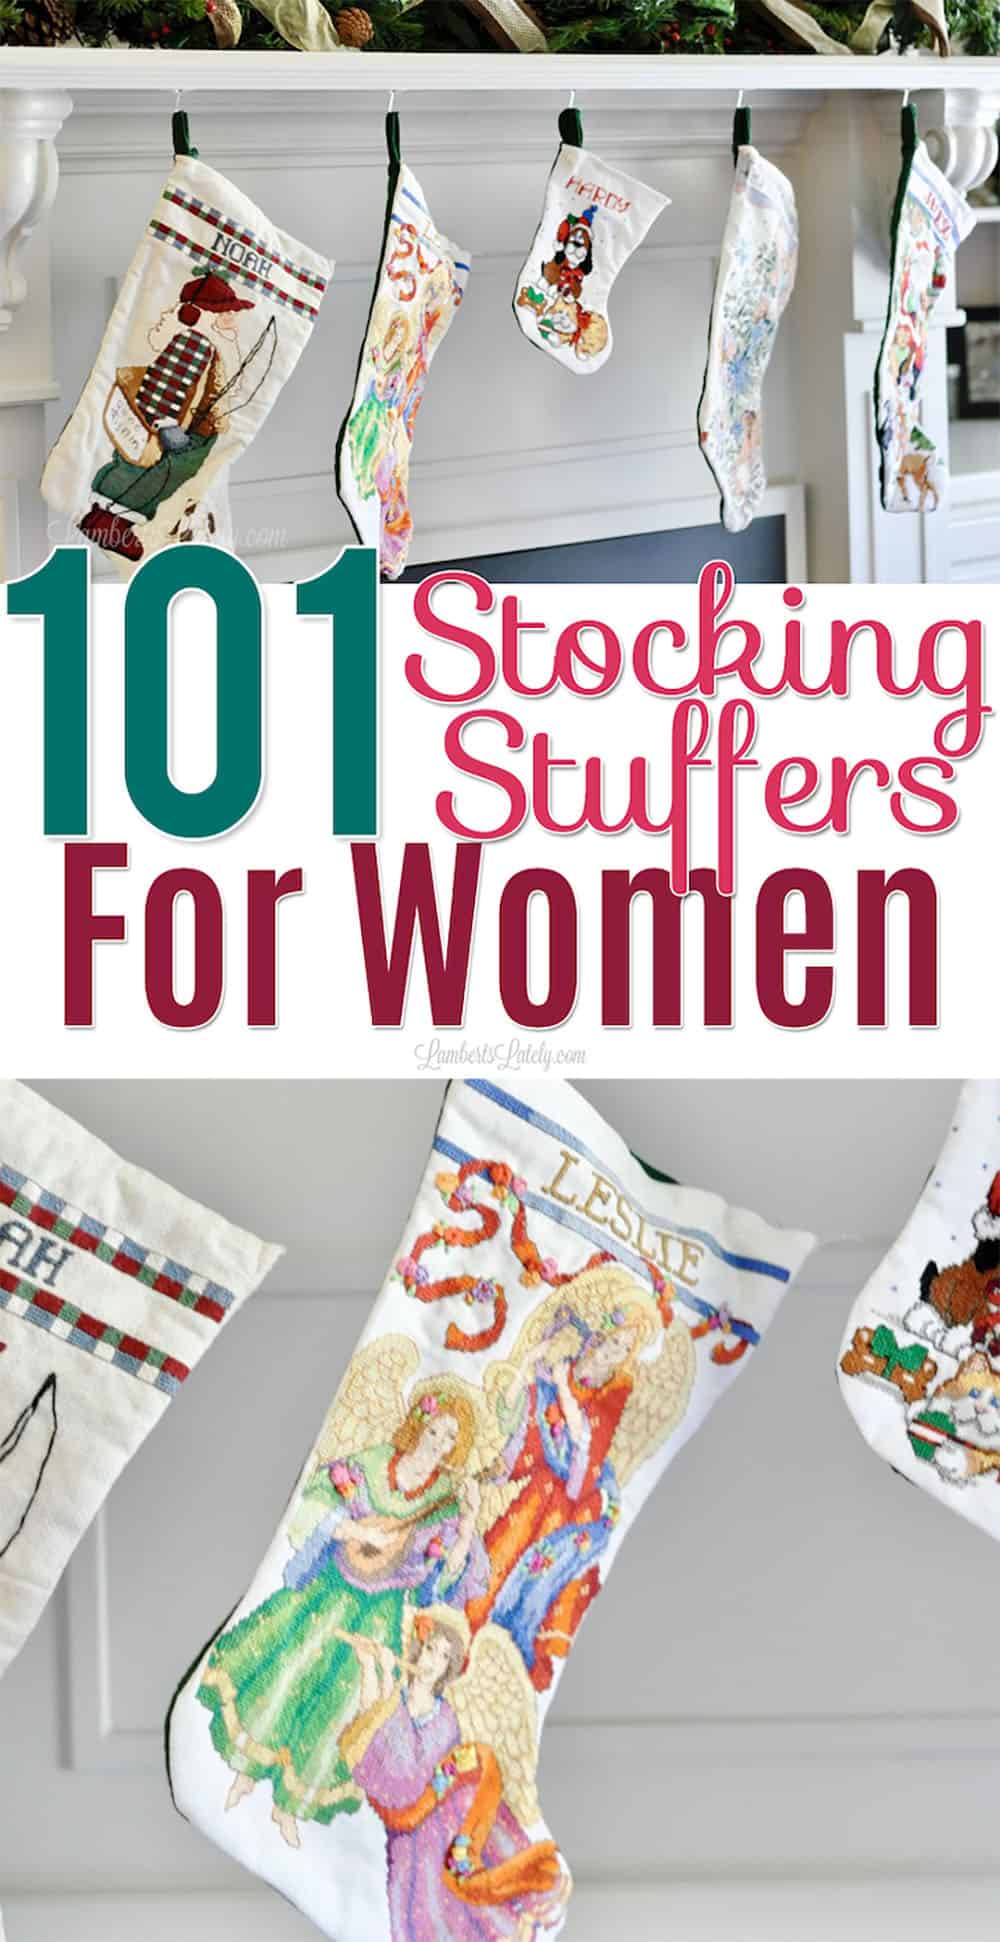 101 Unique Stocking Stuffers for Women...huge list of different small gift ideas for a woman, broken into categories (crafter, beauty guru, athlete, etc.). Great resource when shopping for wife or girlfriend - even mom or grandmother!